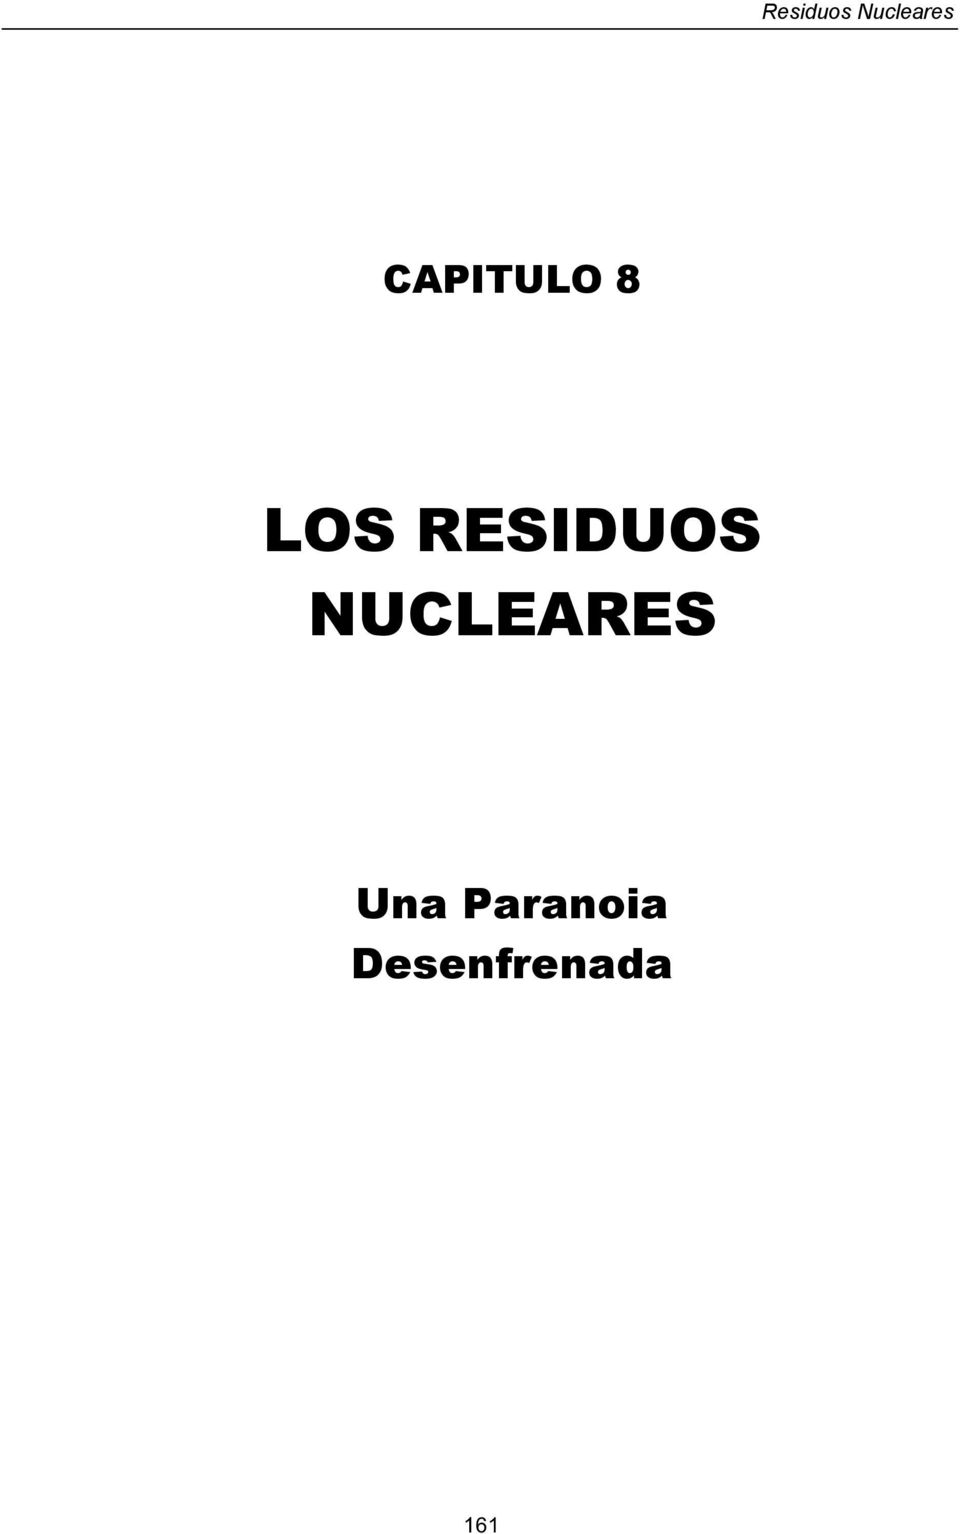 RESIDUOS NUCLEARES